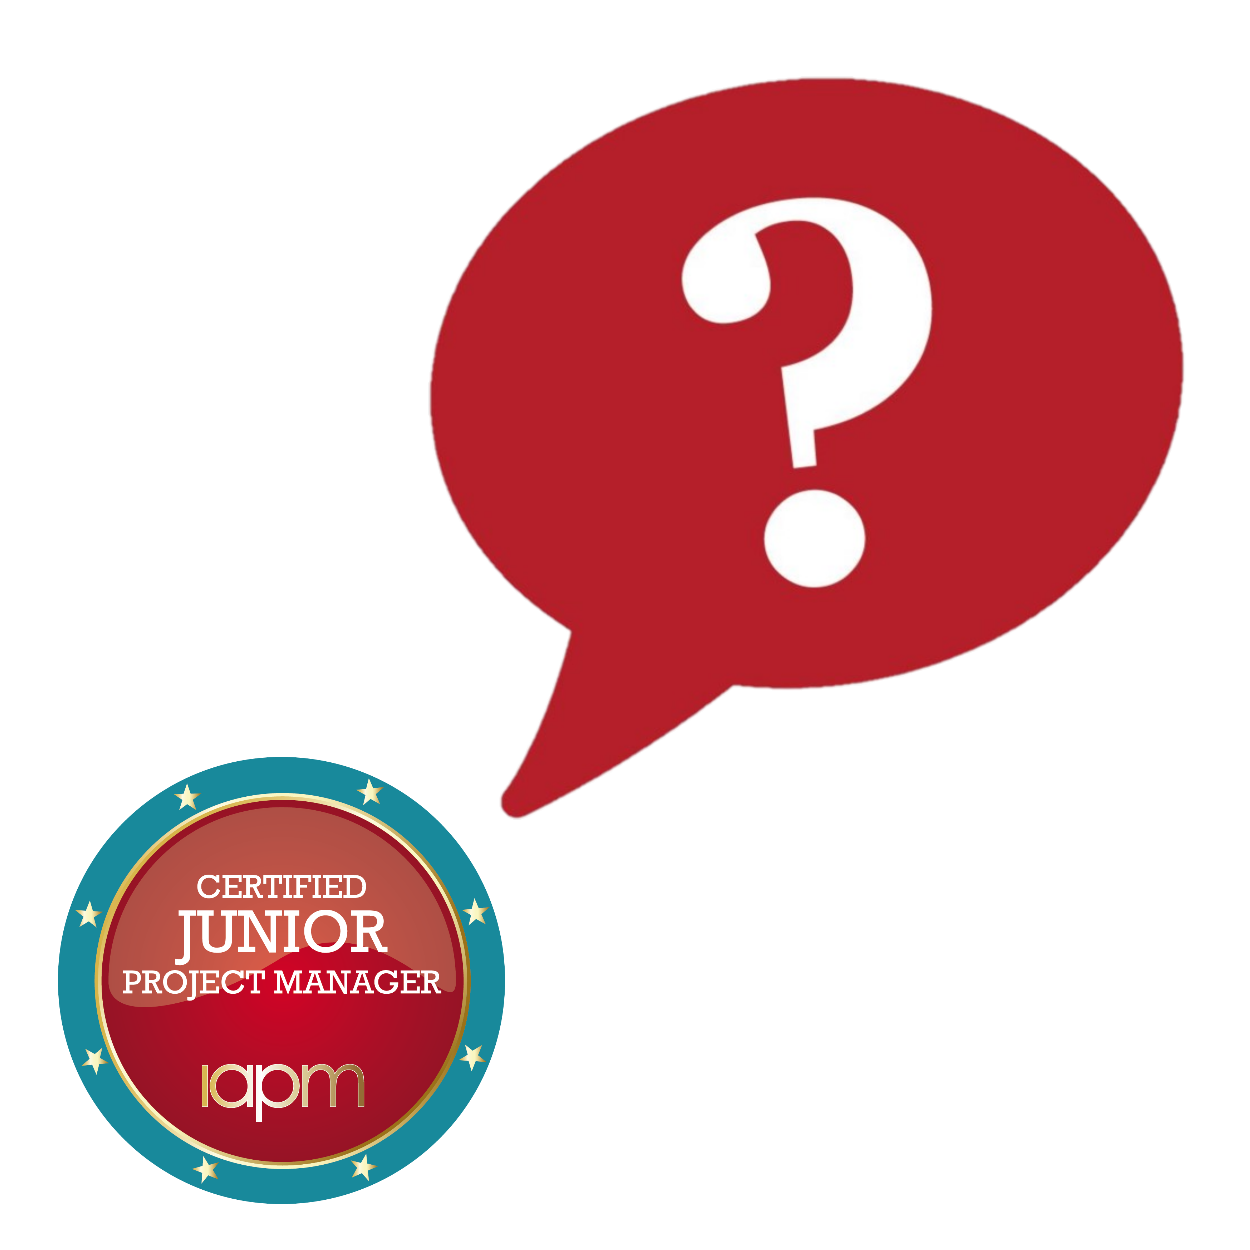 The badge of the 'Certified Junior Project Manager (IAPM)' with a question mark bubble.